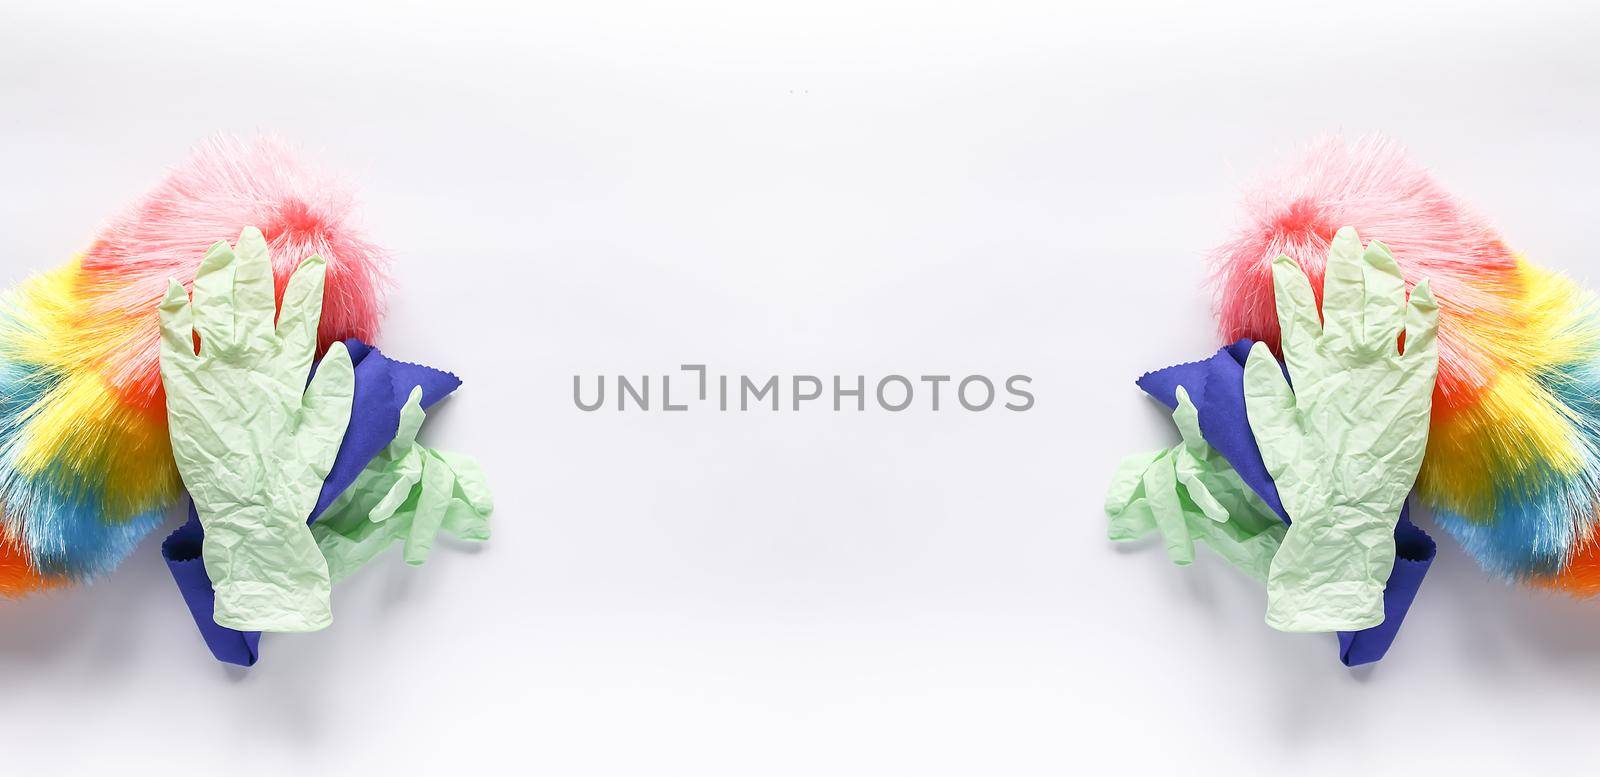 Rubber gloves, the duster and microfiber cloth on light background. Symmetrical long banner